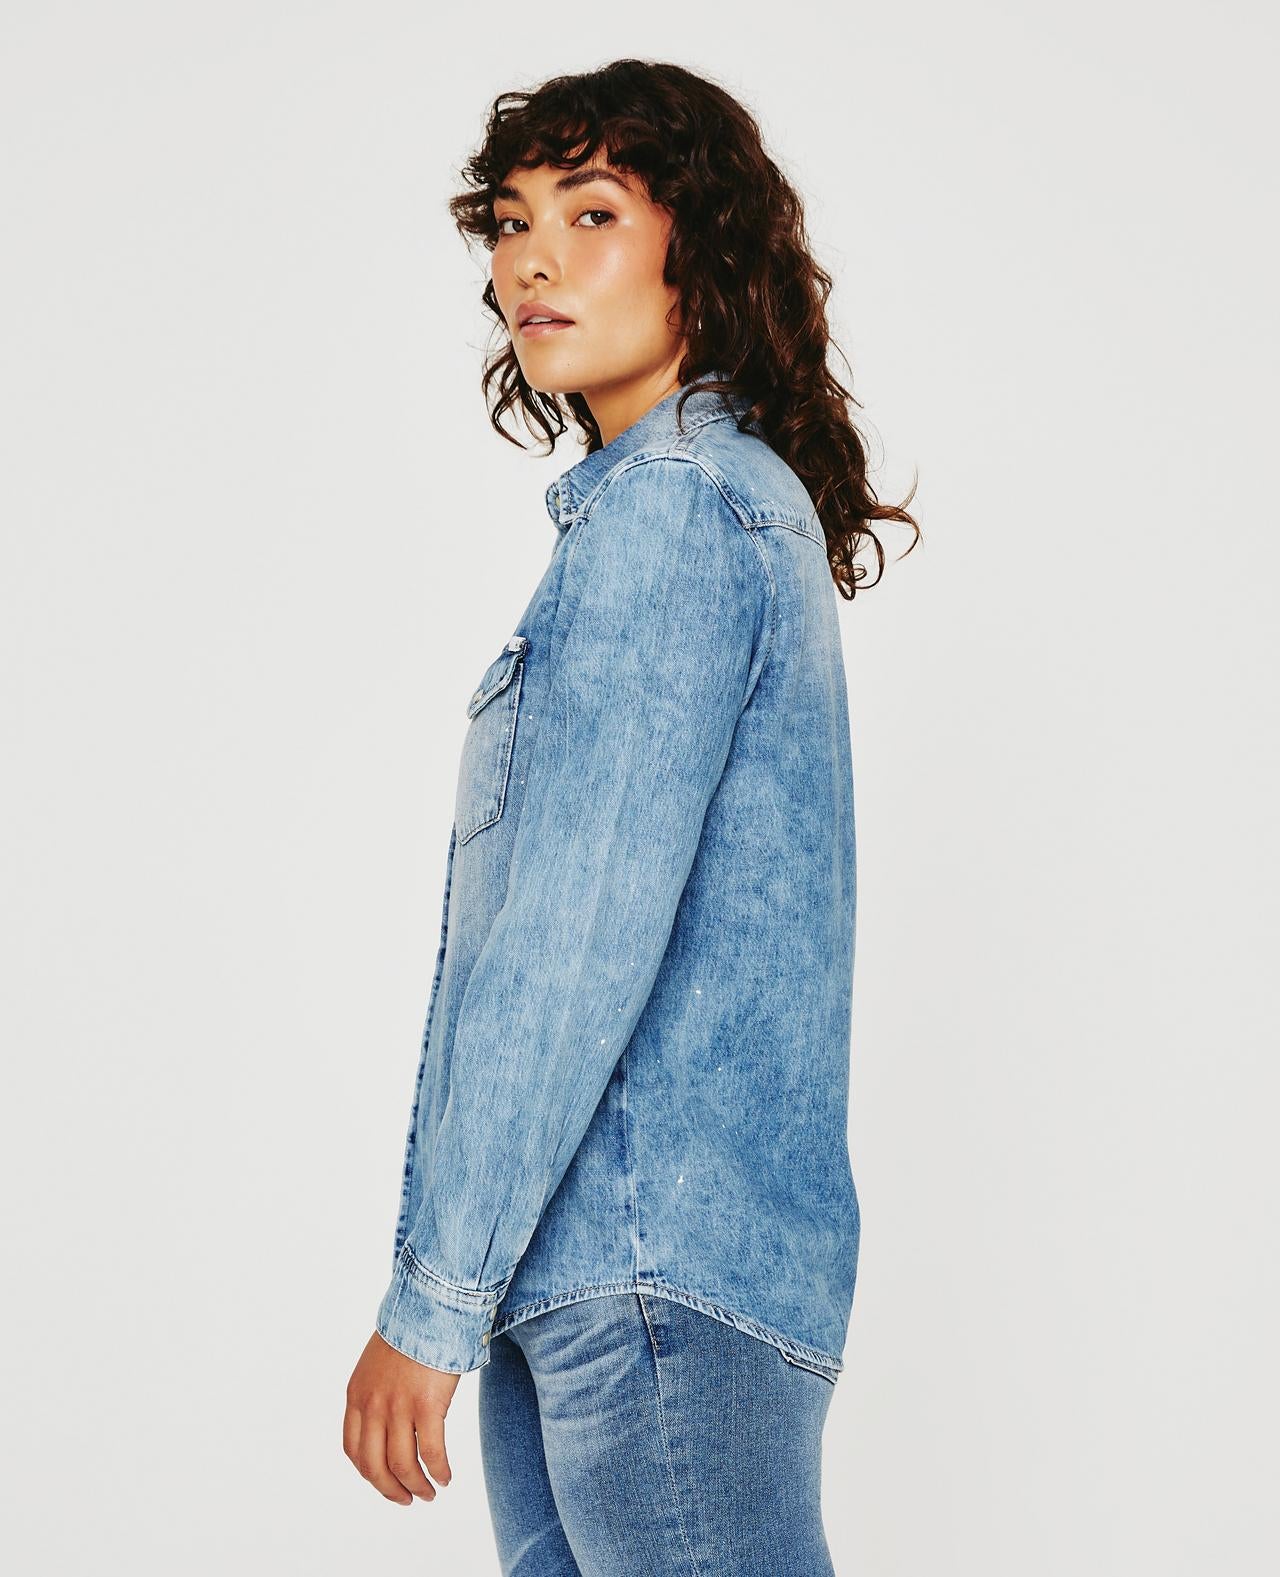 AG Western Blue Denim shirt in western style - Blouses & Shirts